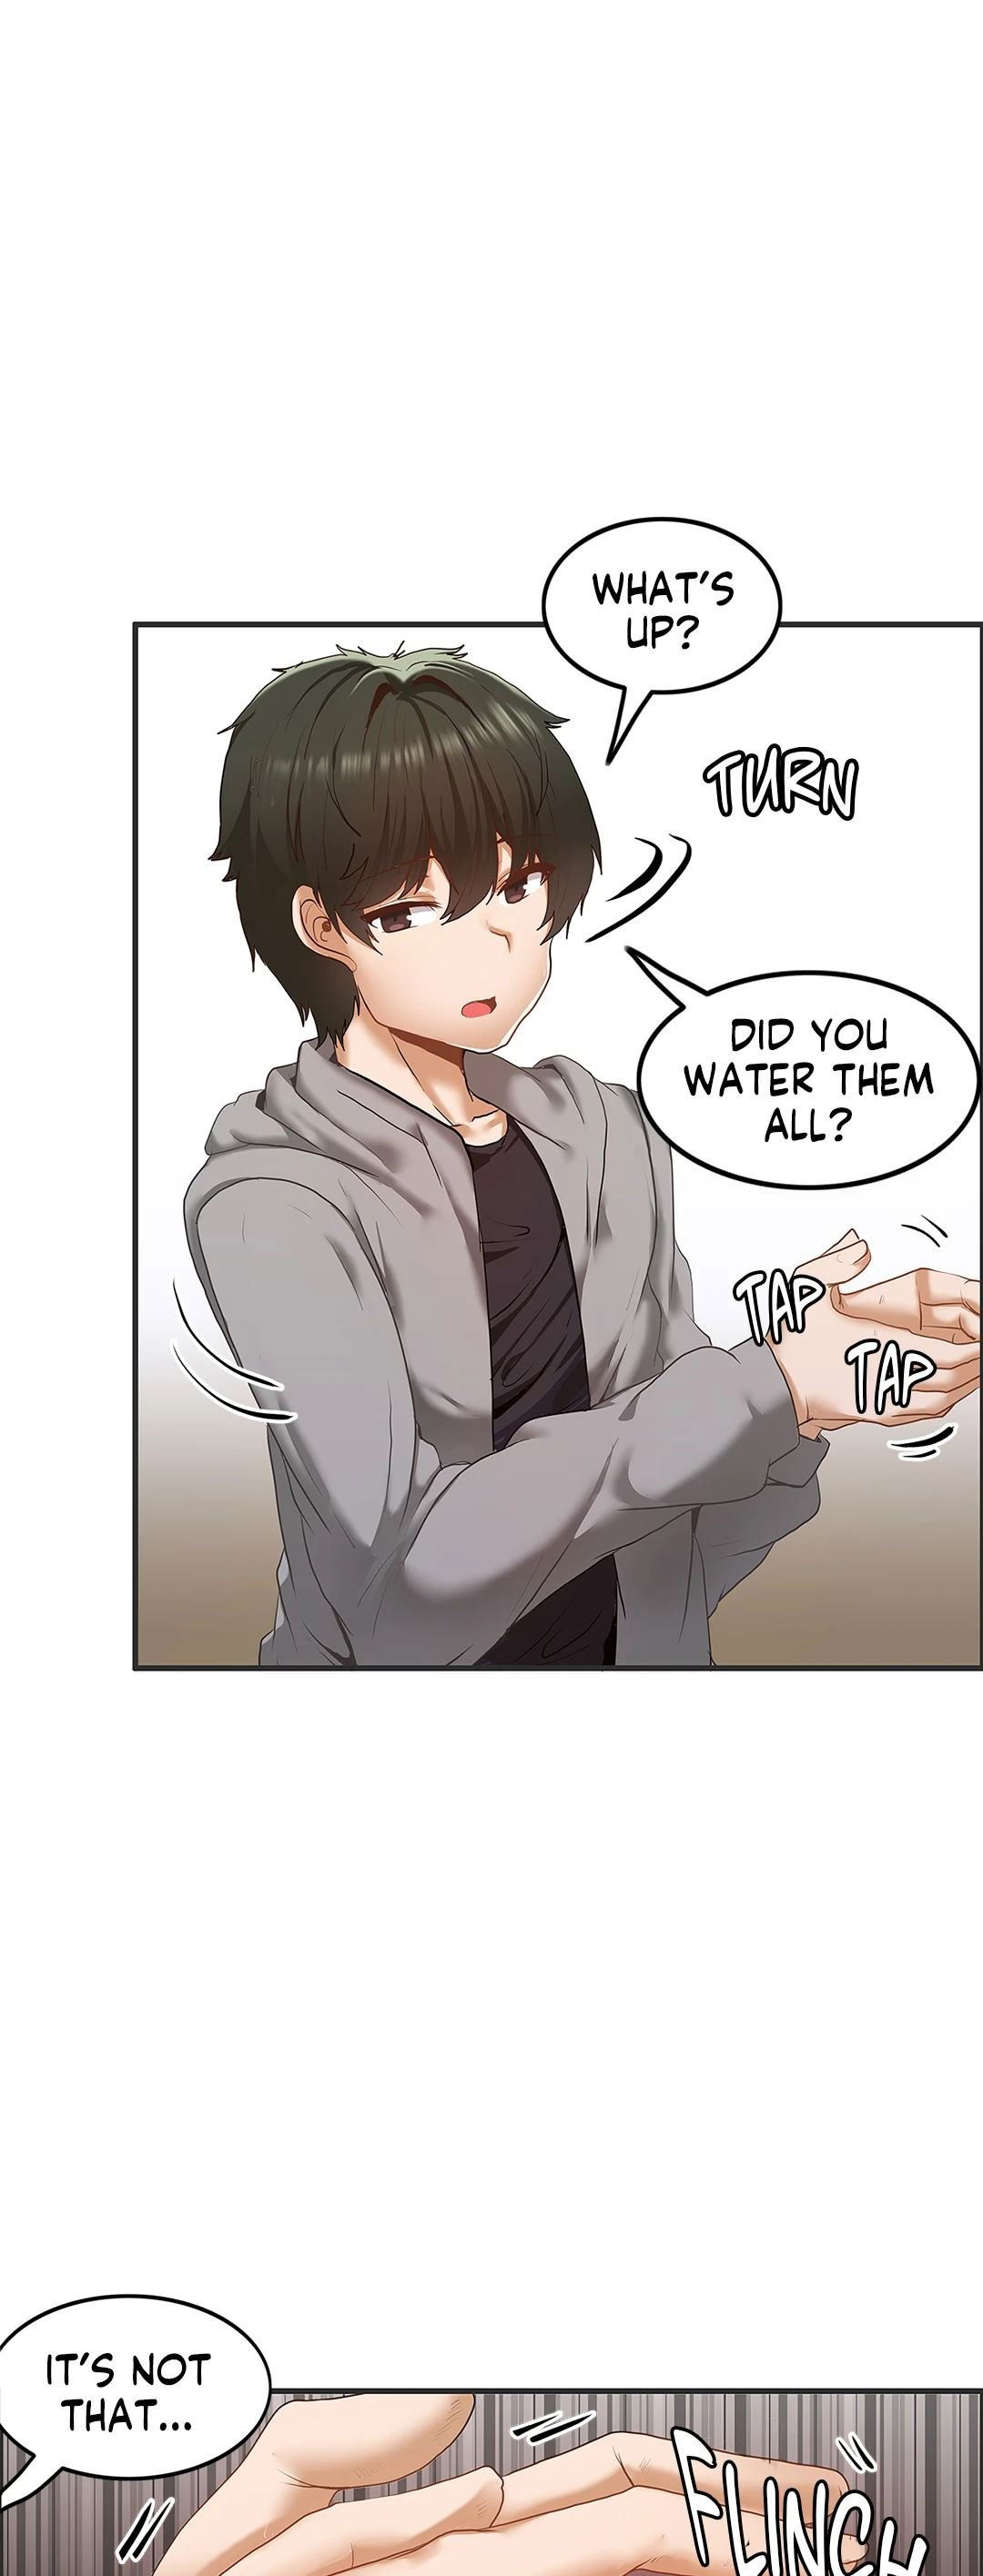 the-two-eves-the-girl-trapped-in-the-wall-chap-3-27